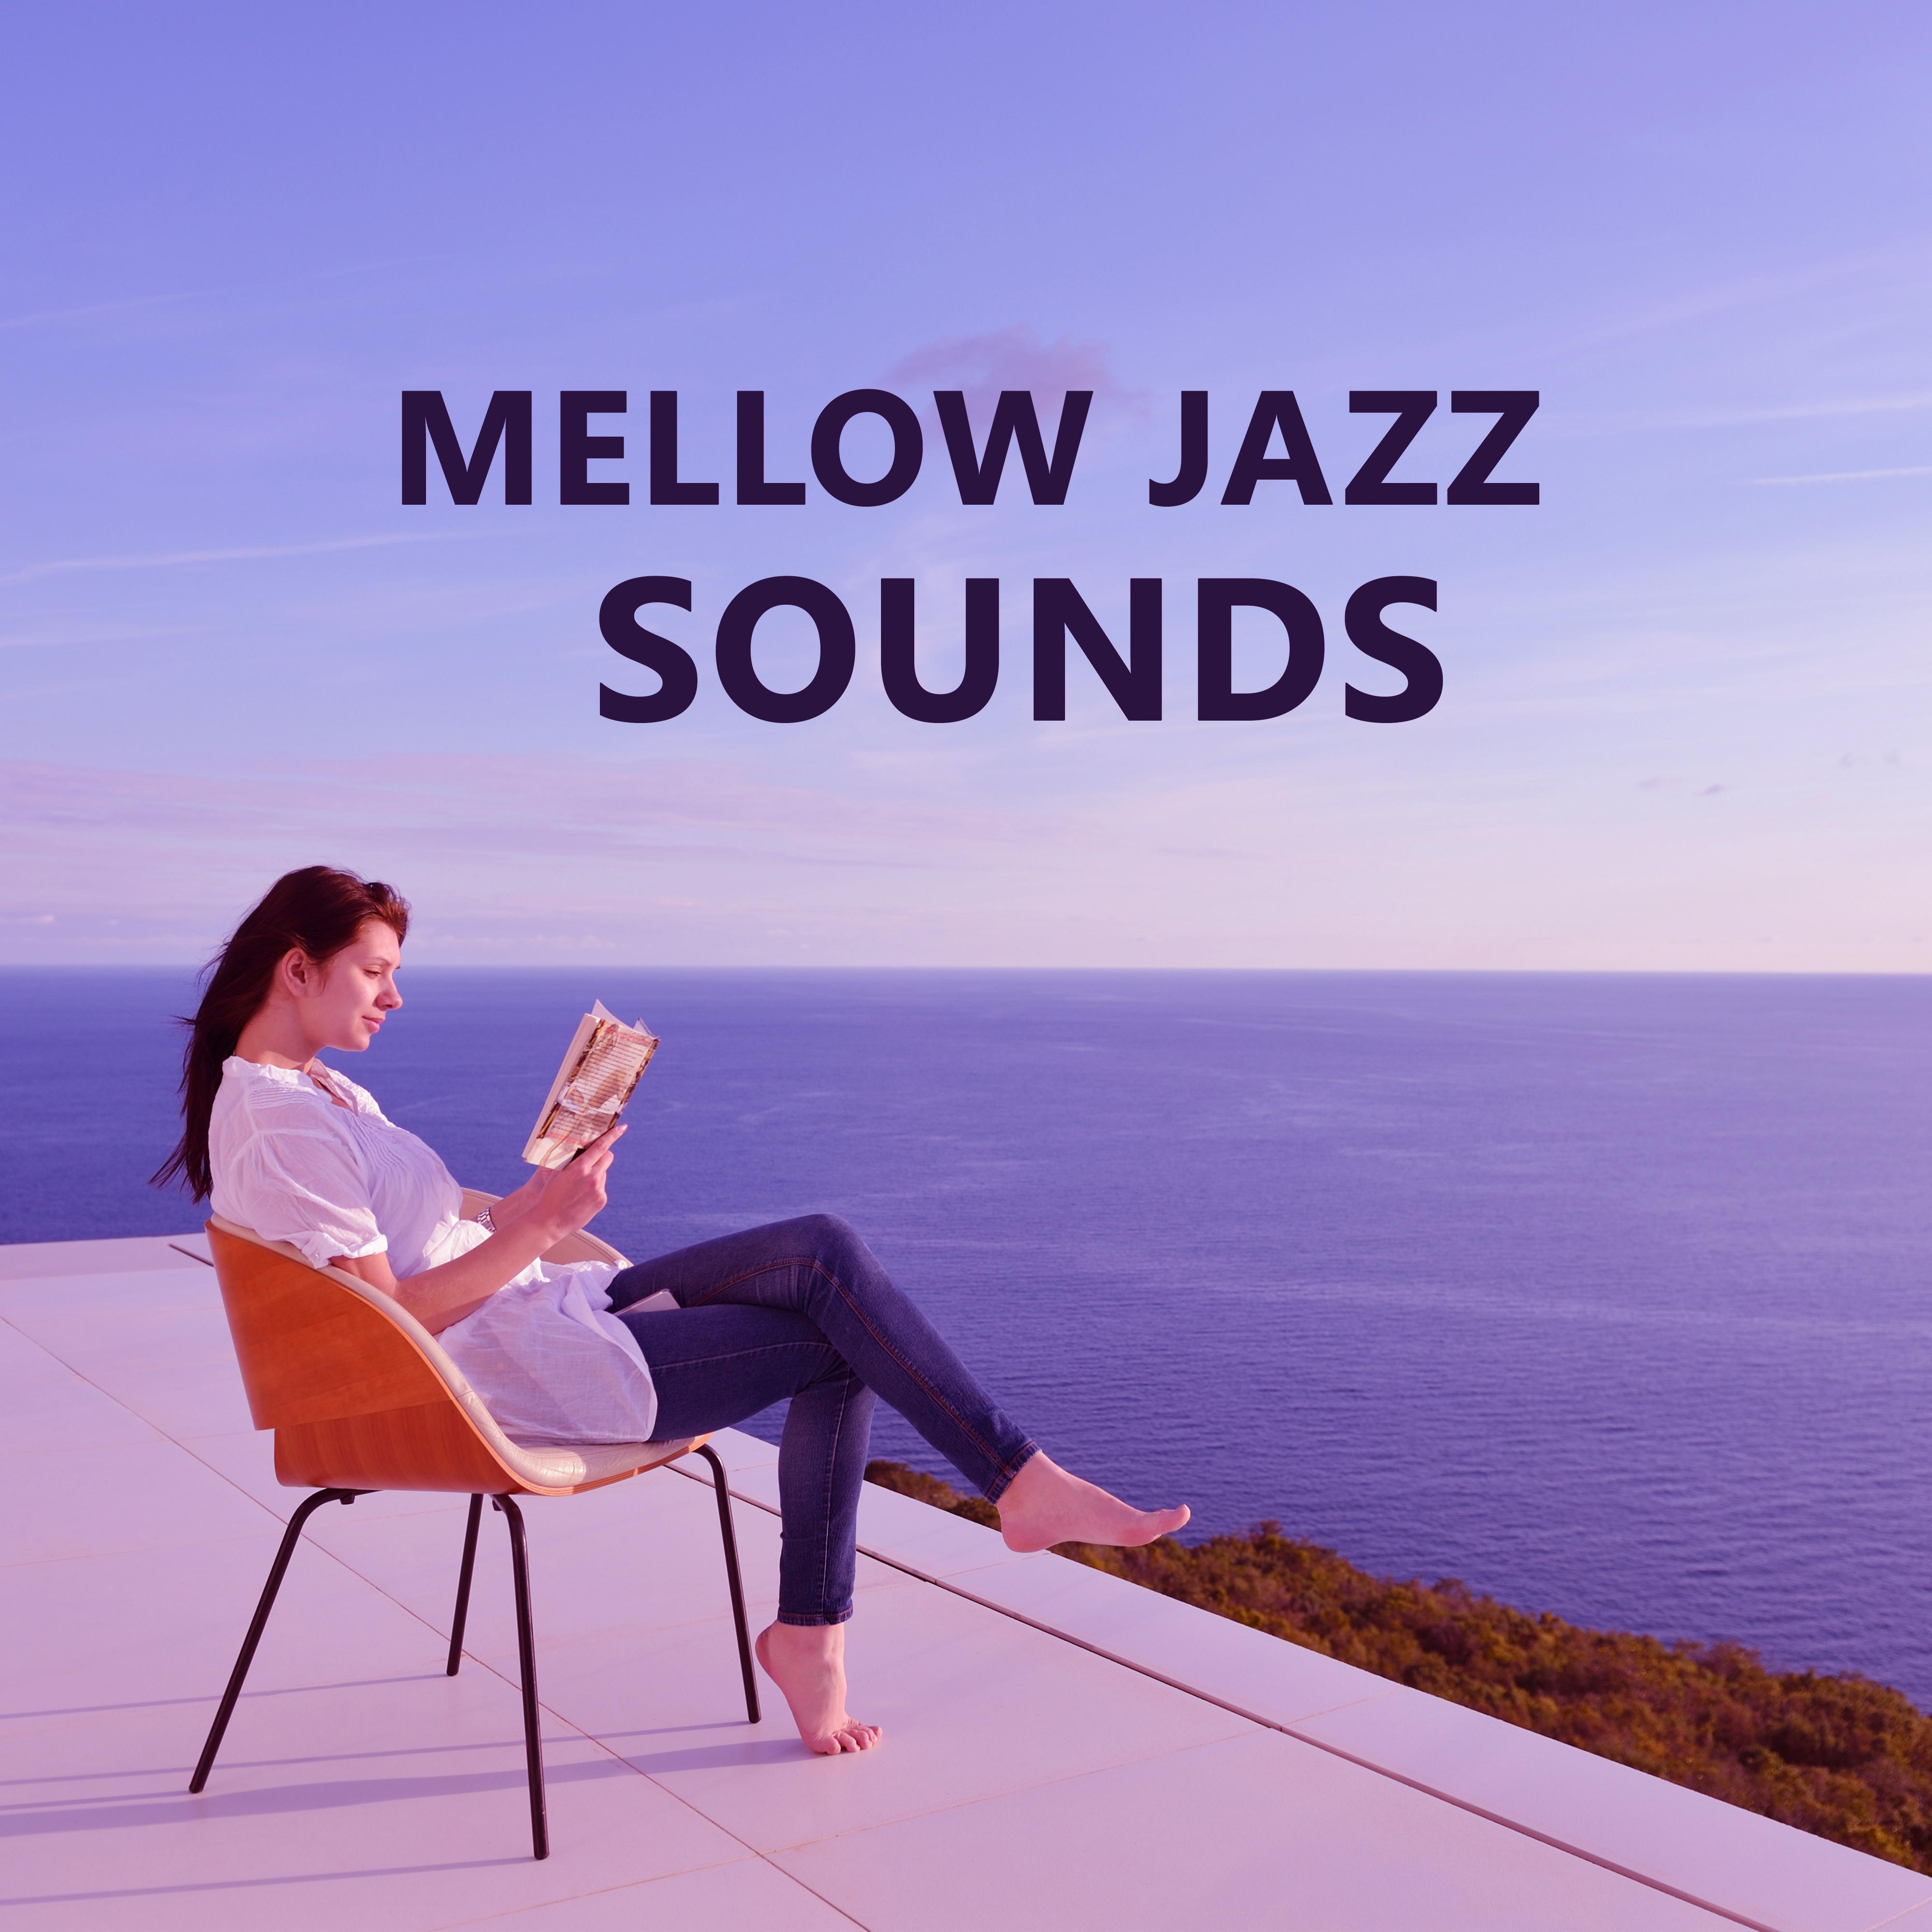 Mellow Jazz Sounds  Soft Sounds to Rest, Relaxing Night Jazz Songs, Peaceful Note